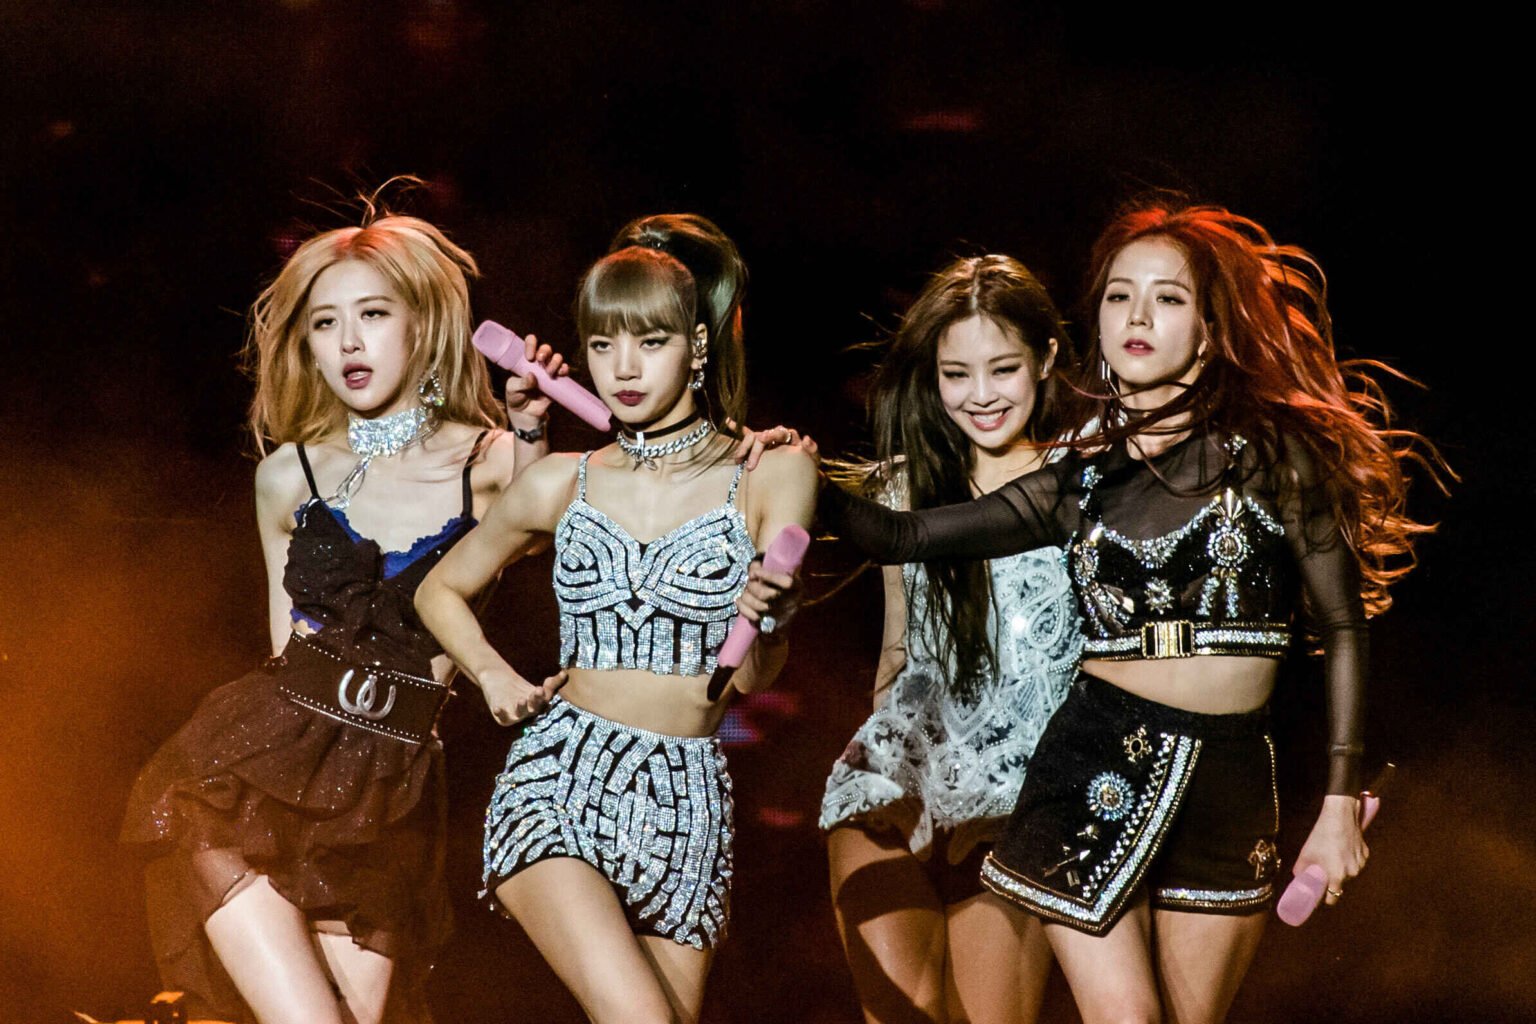 Blackpink is the fresh pop girl group you've been waiting for. Here are all of the killer Blackpink collab songs to spice up your summer playlist.